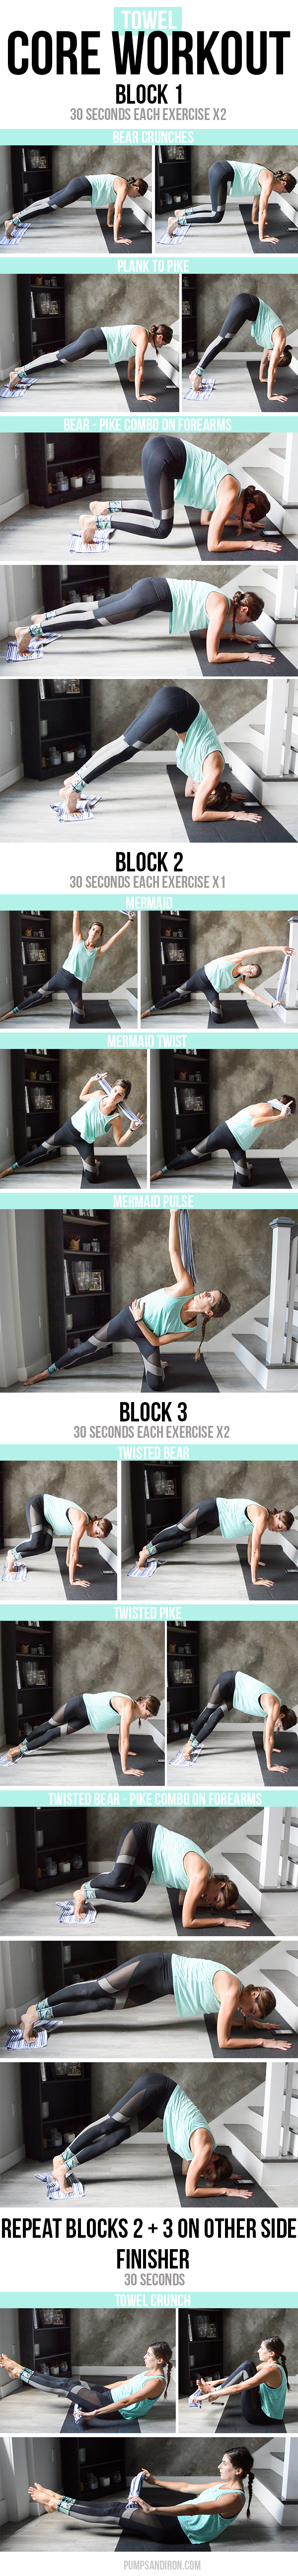 15-Minute Towel Core Workout - a mix of sliding plank work and kneeling core exercises